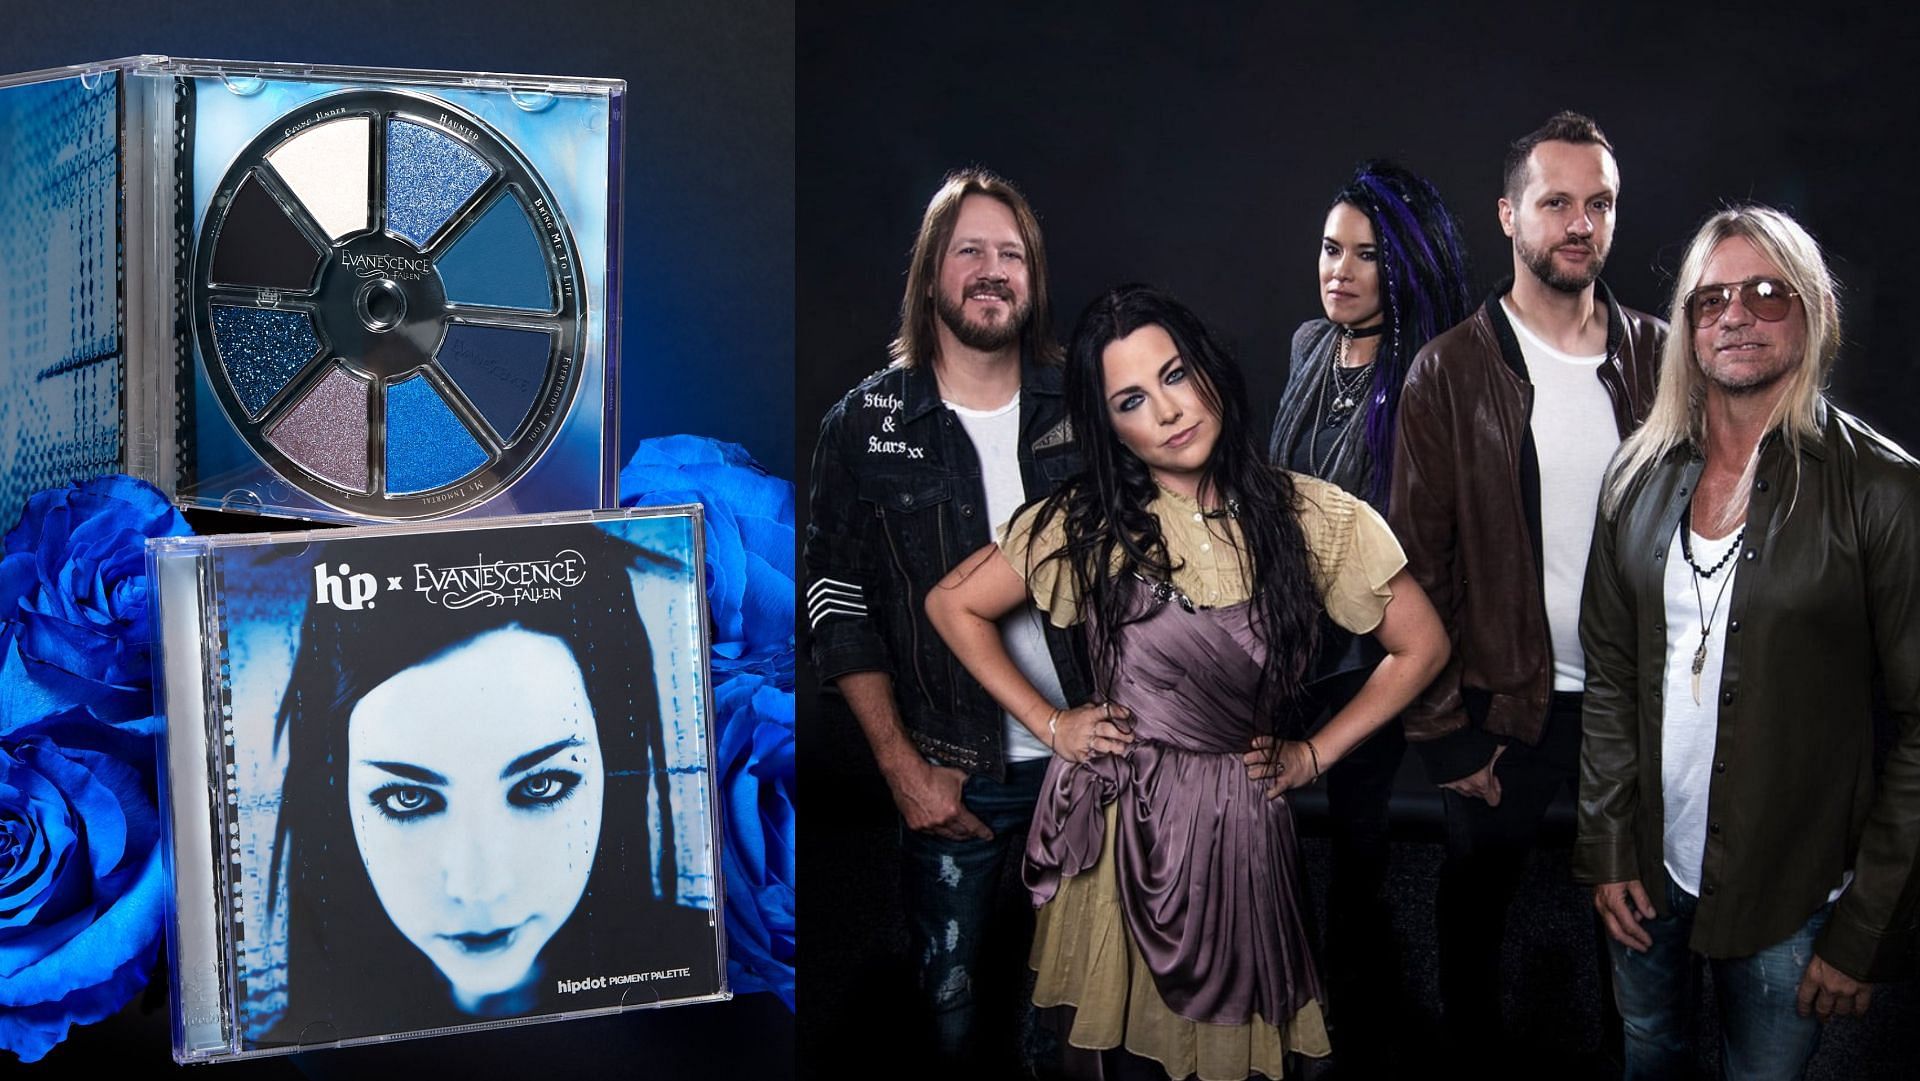 Iconic rock band Evanescence brings new eyeshadow palette for fans on their album Fallen